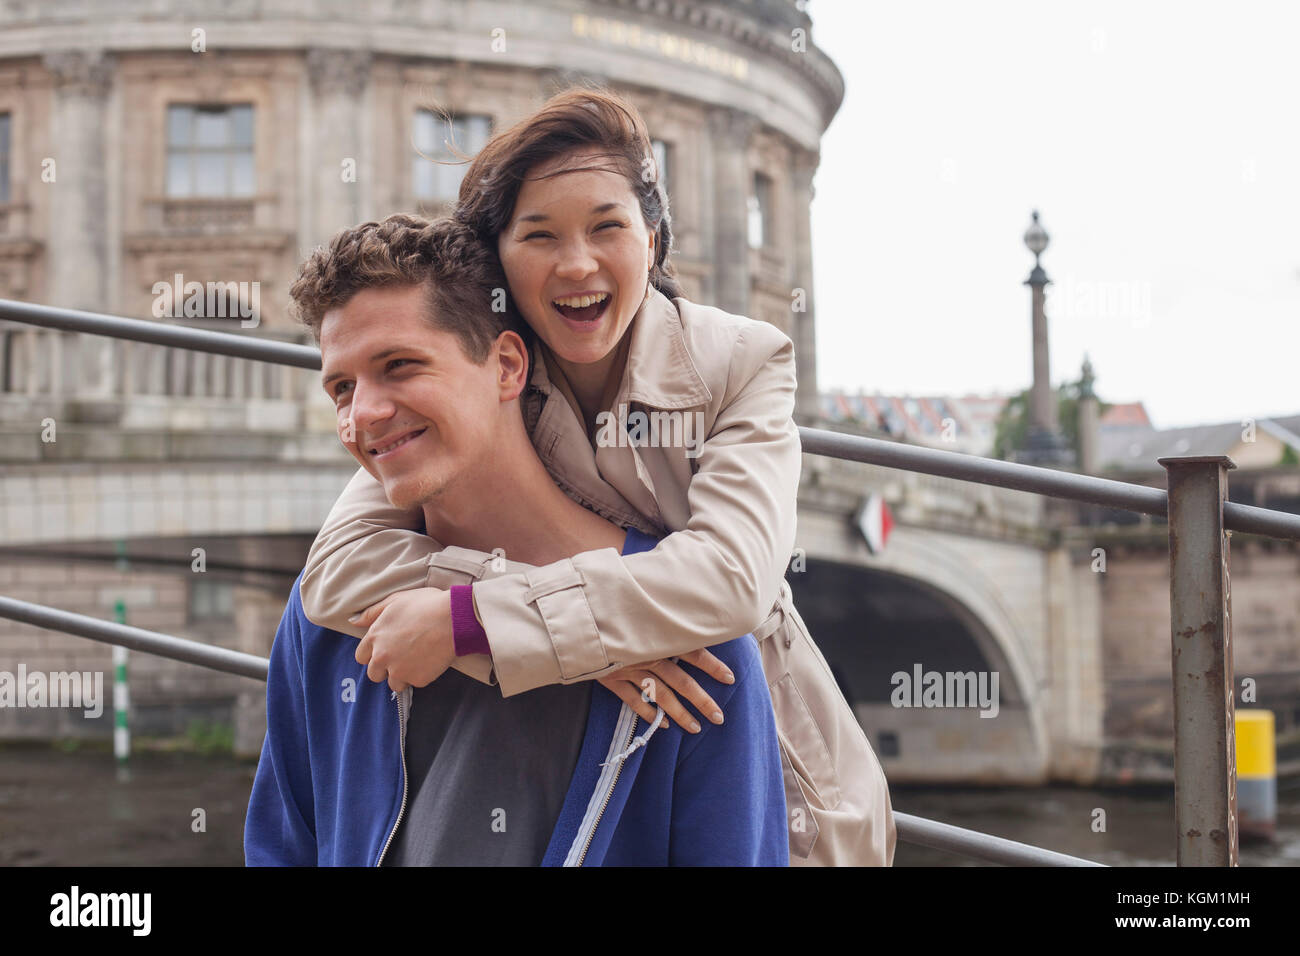 Low angle portrait of cheerful woman embracing male friend against Bode Museum, Germany Stock Photo